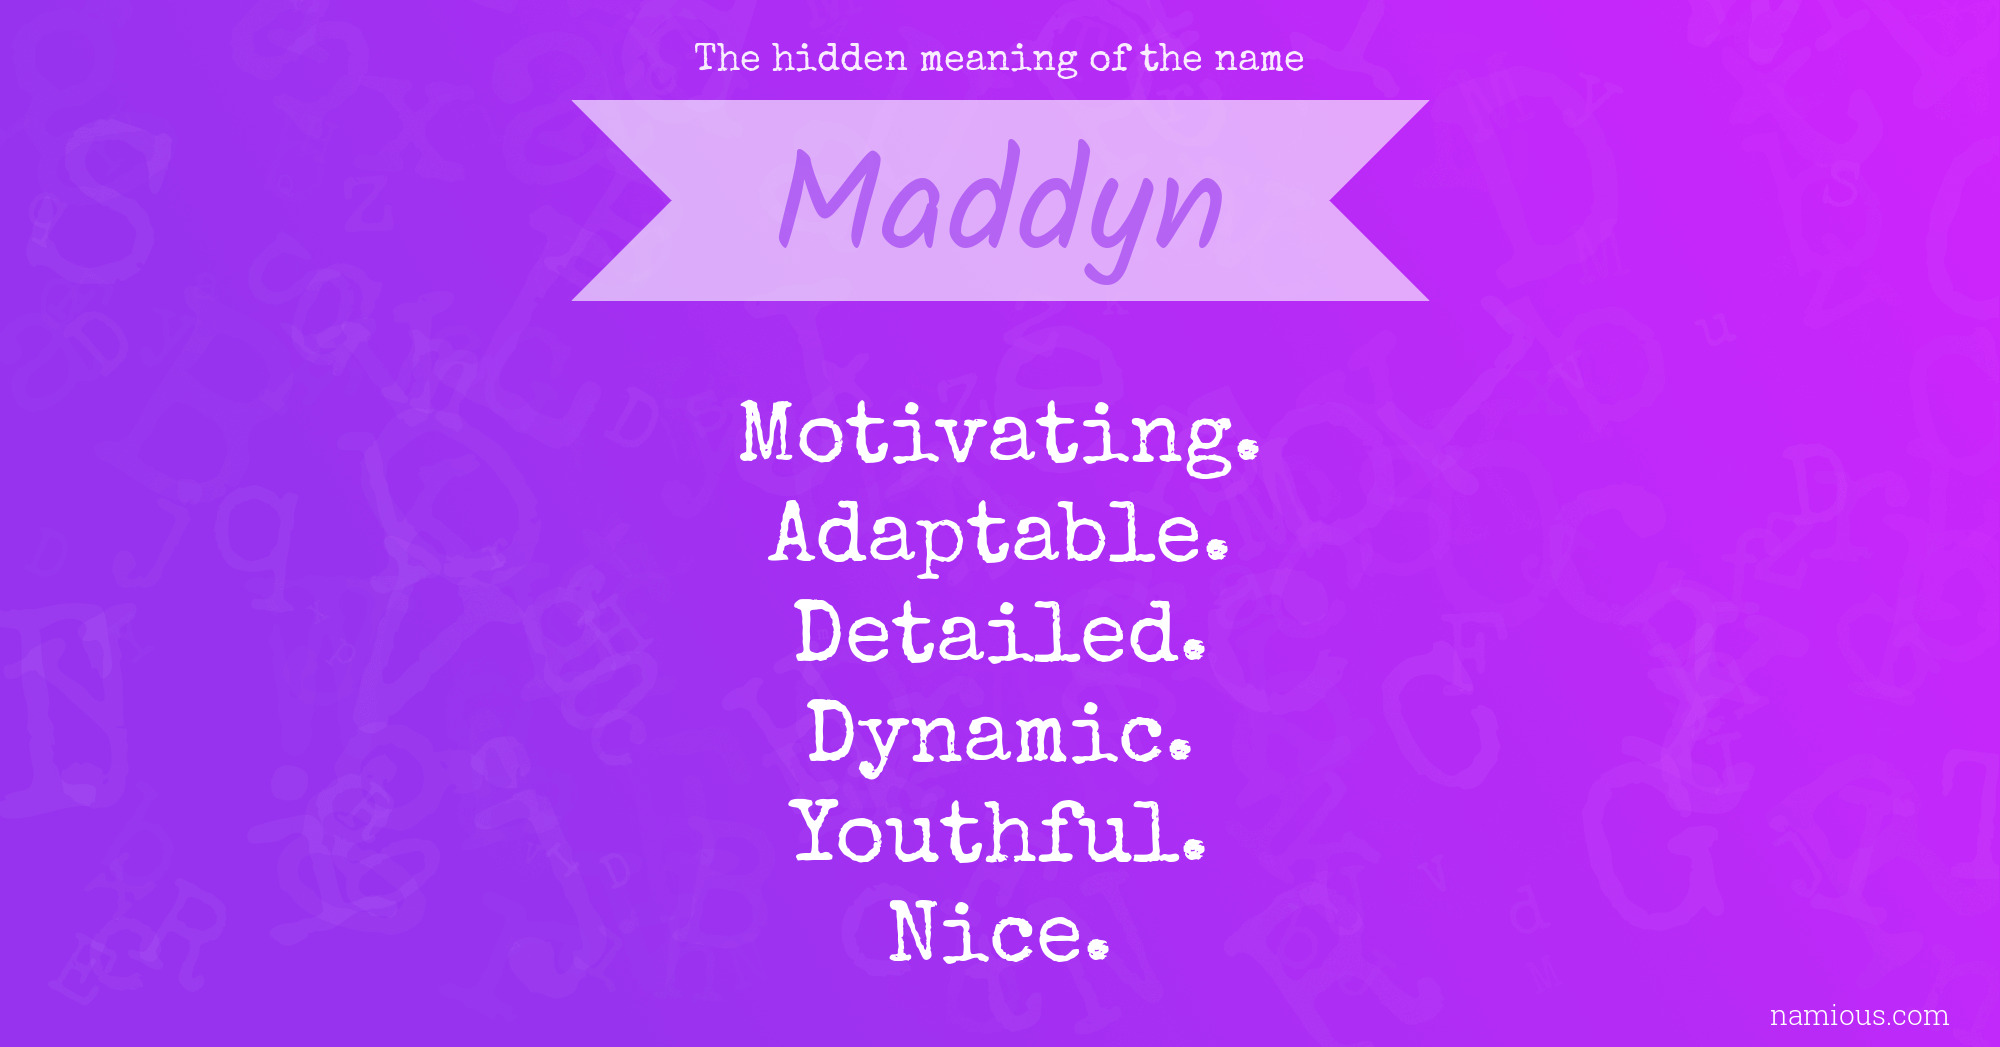 The hidden meaning of the name Maddyn